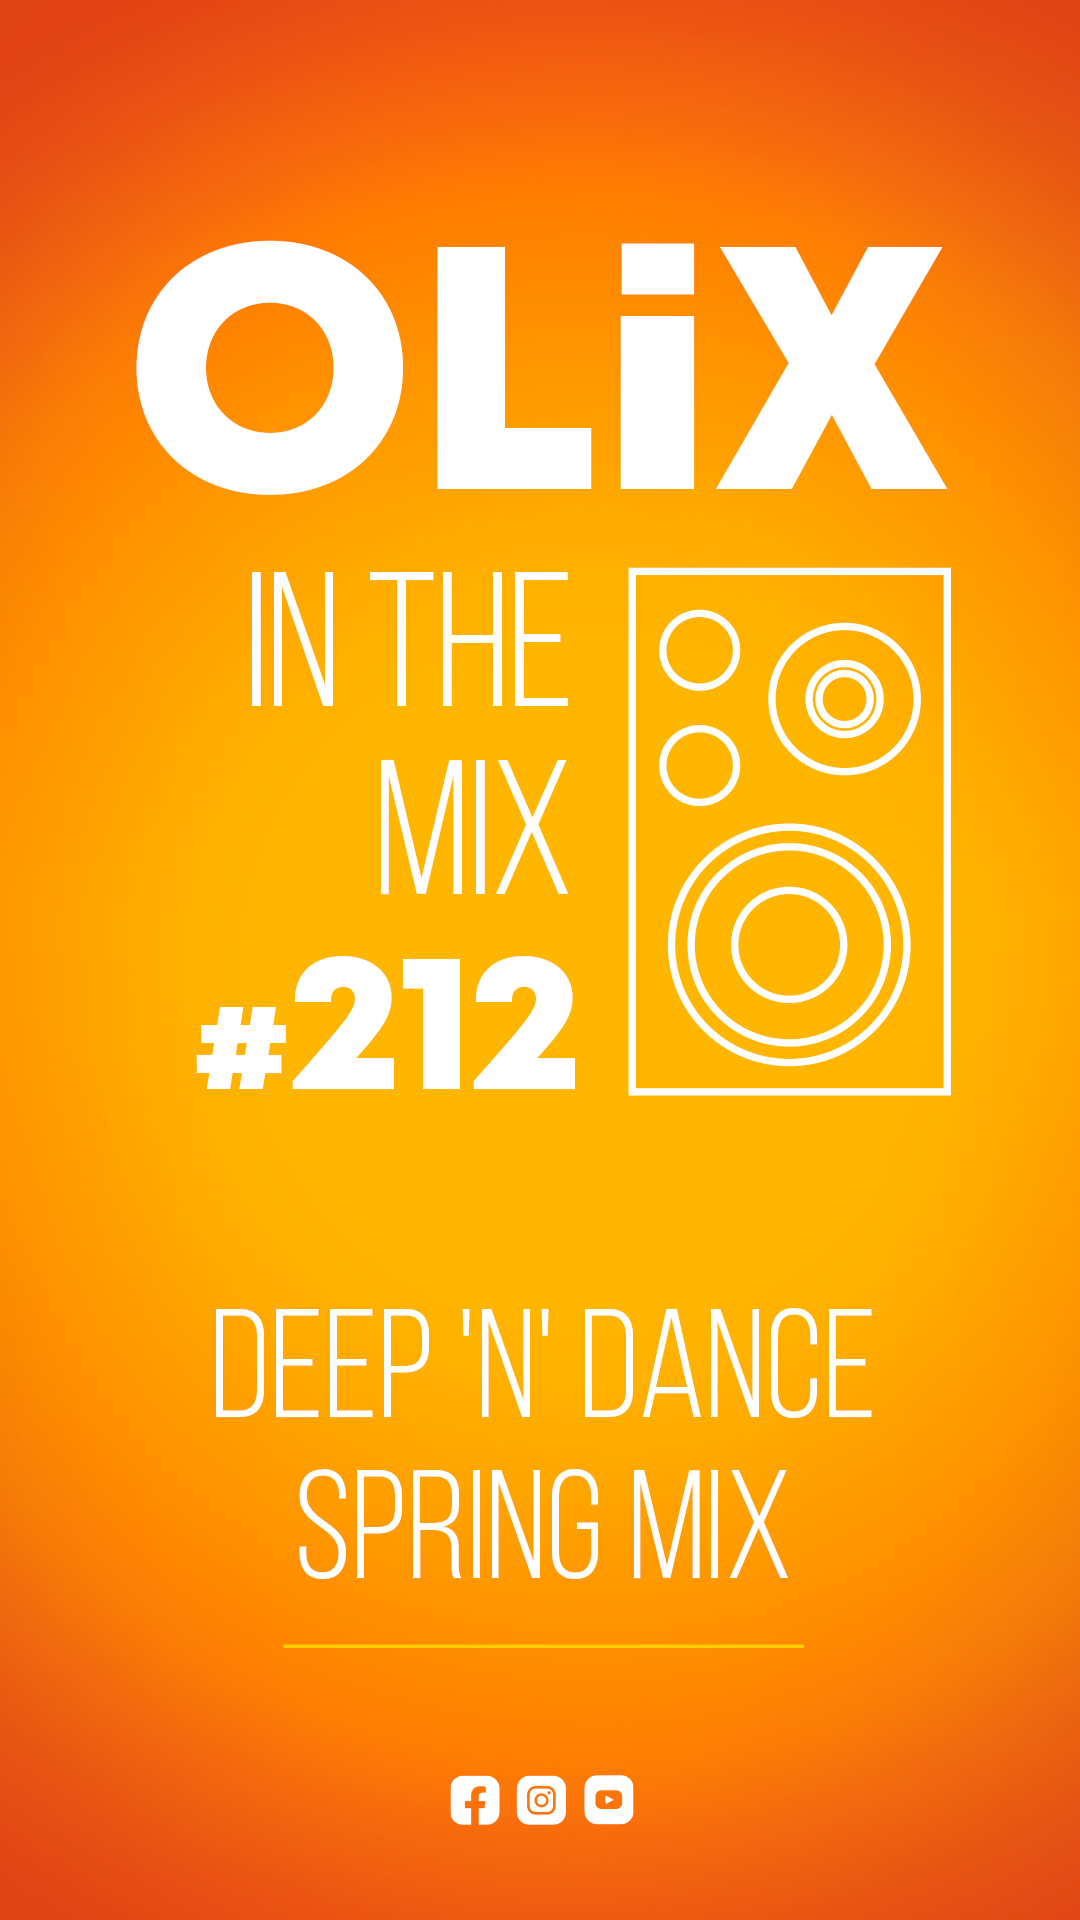 OLiX in the Mix - 212 - Deep n Dance Spring Mix